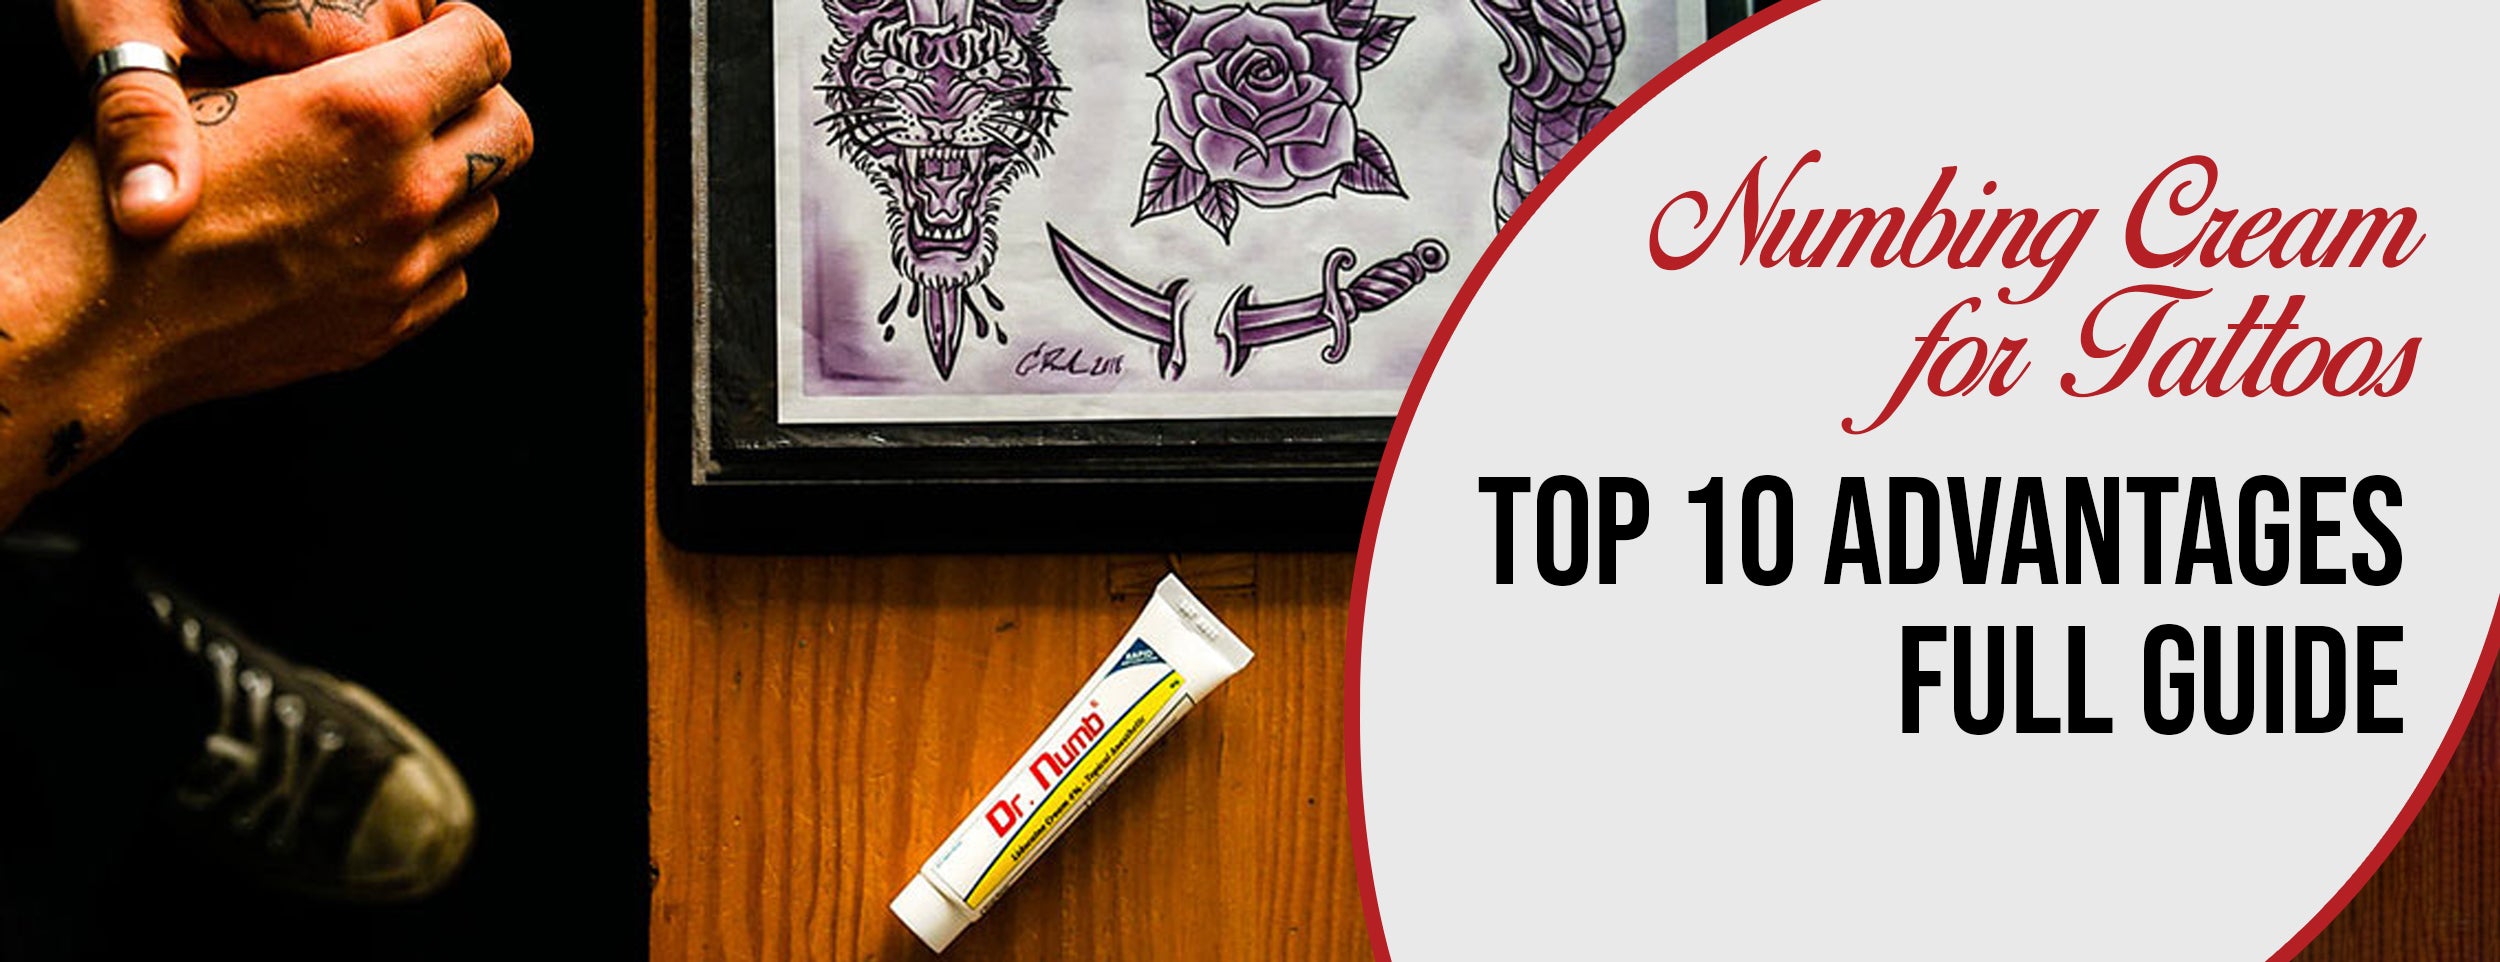 Numbing Cream for Tattoos Top 10 Advantages Full Guide